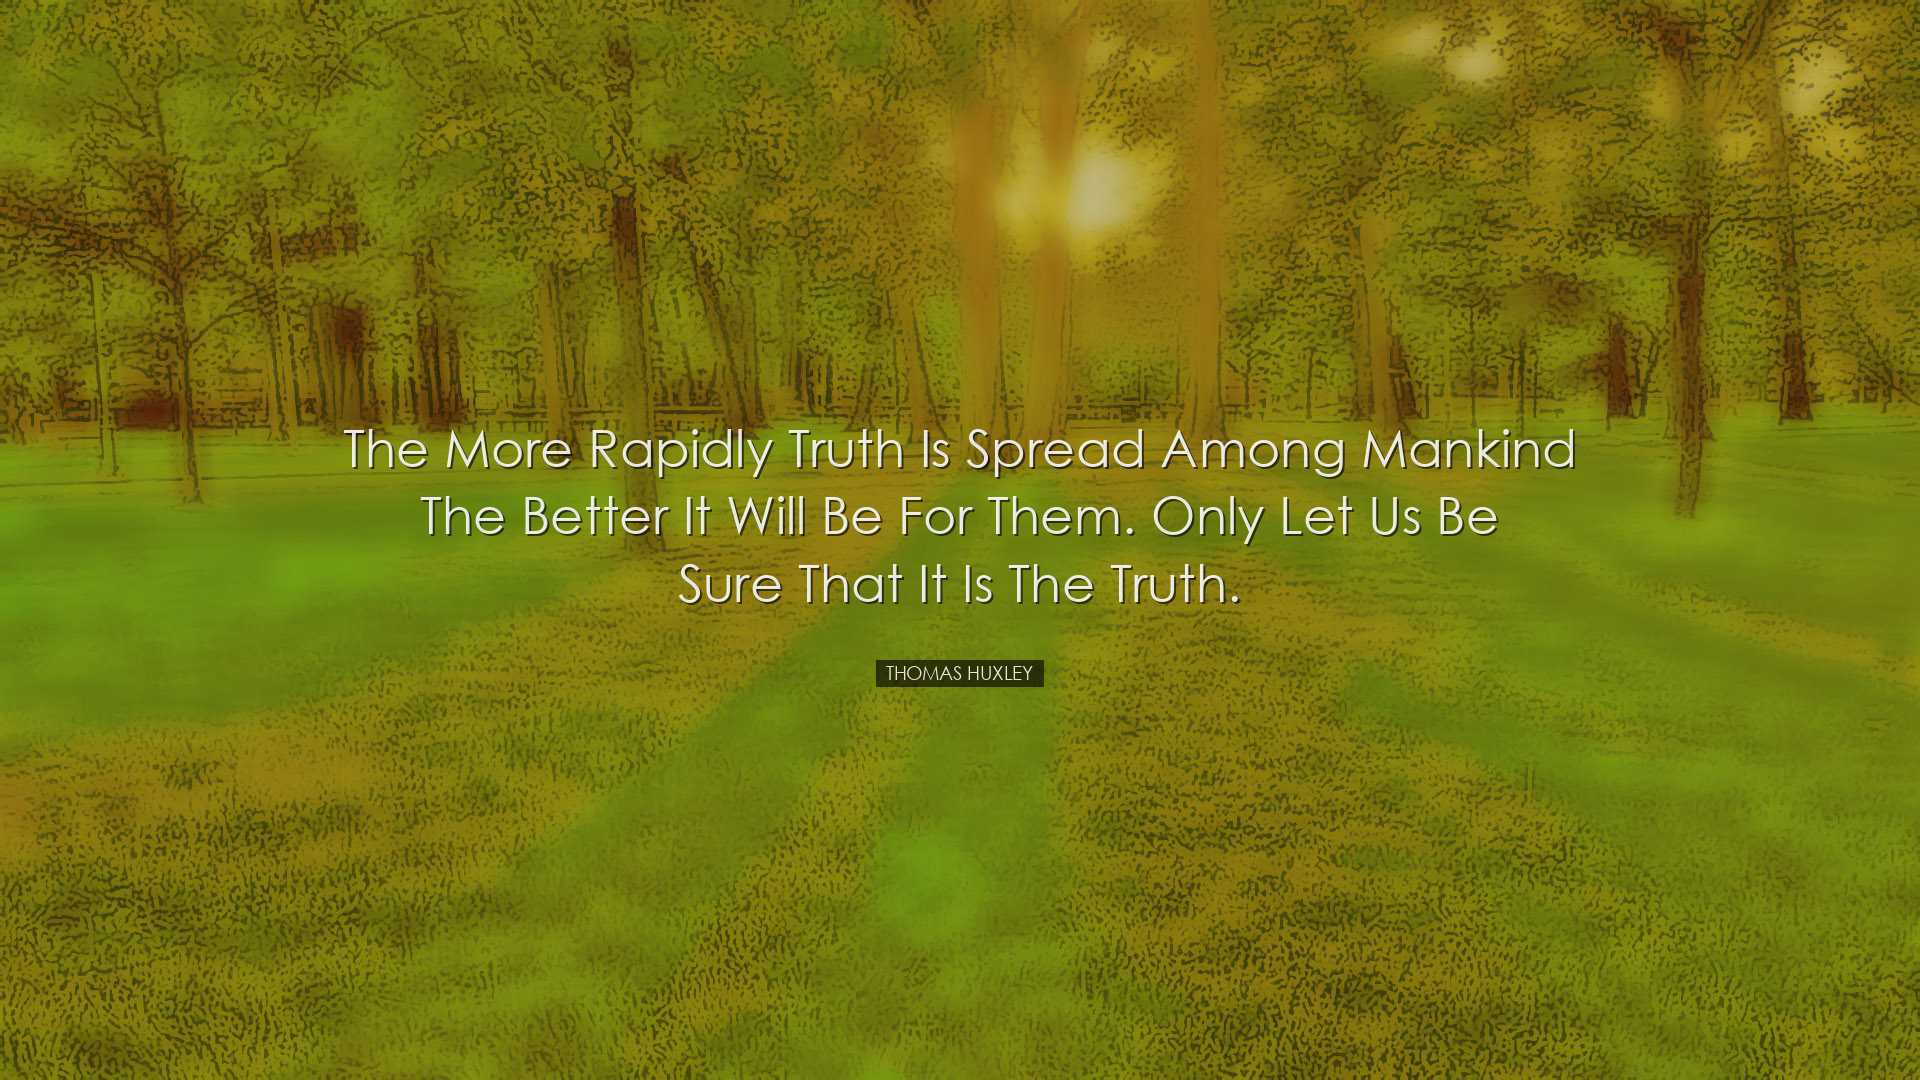 The more rapidly truth is spread among mankind the better it will